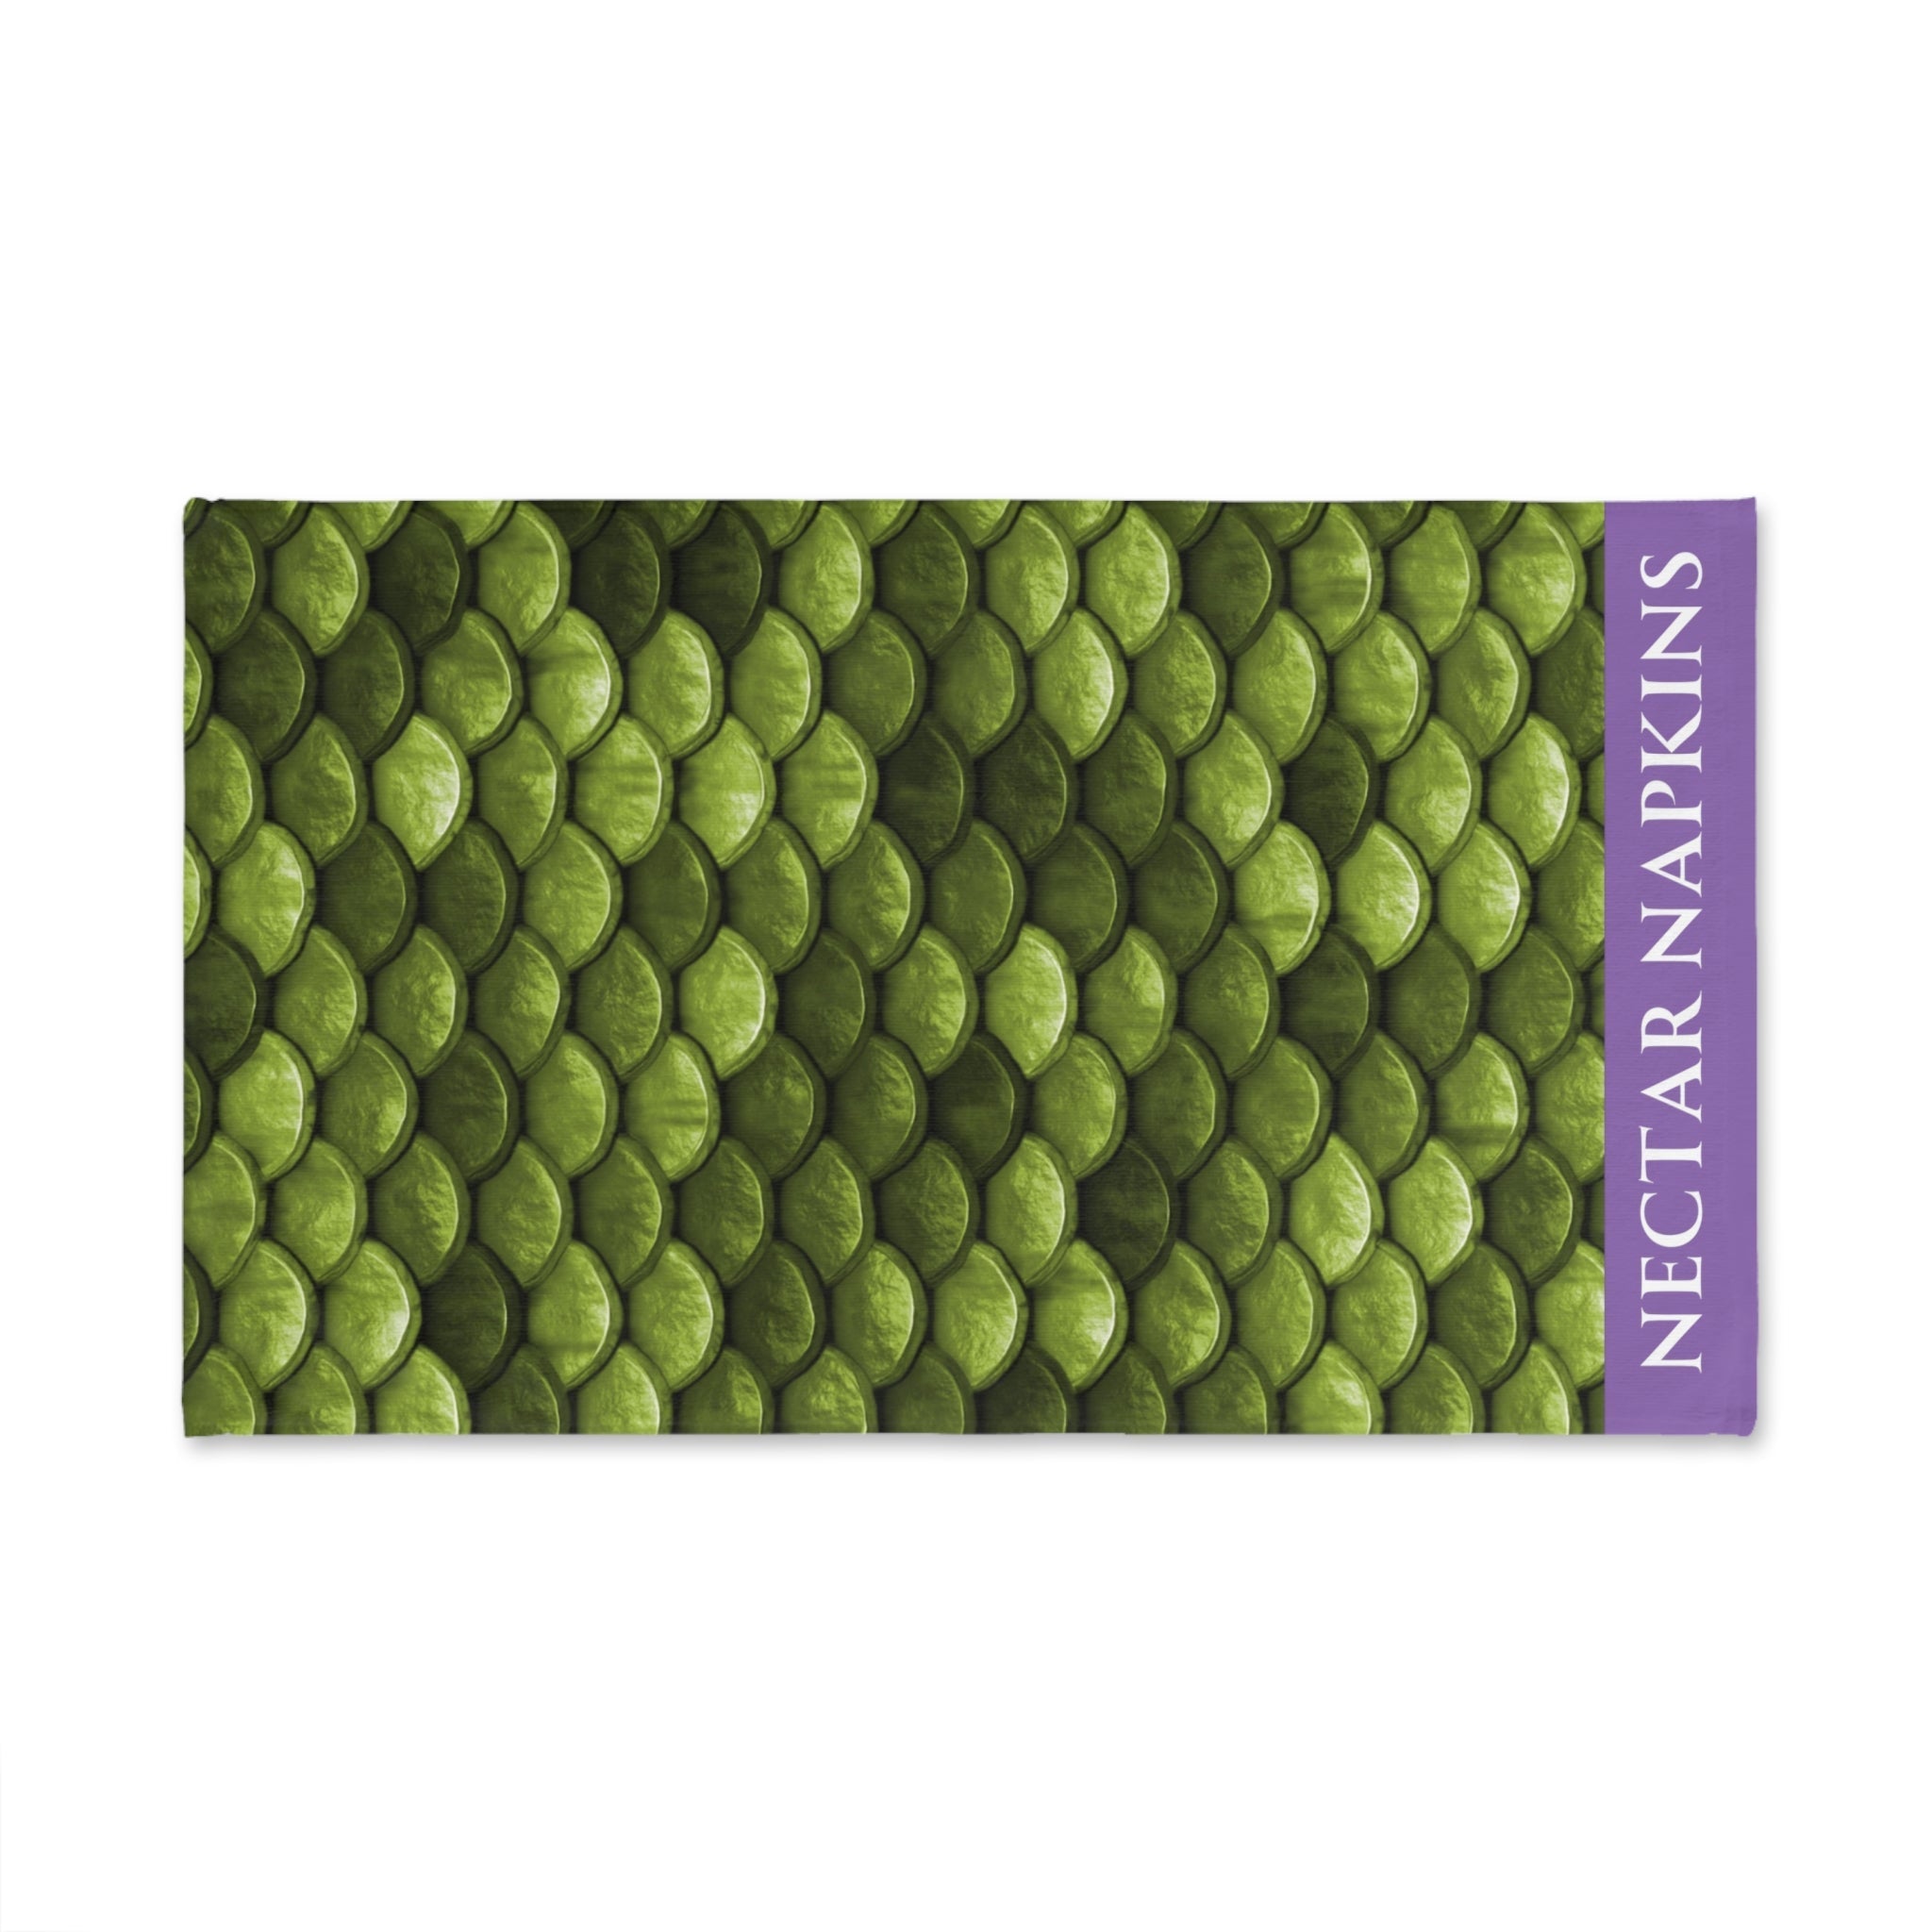 Mermaid Tail Green Lavendar | Funny Gifts for Men - Gifts for Him - Birthday Gifts for Men, Him, Husband, Boyfriend, New Couple Gifts, Fathers & Valentines Day Gifts, Hand Towels NECTAR NAPKINS